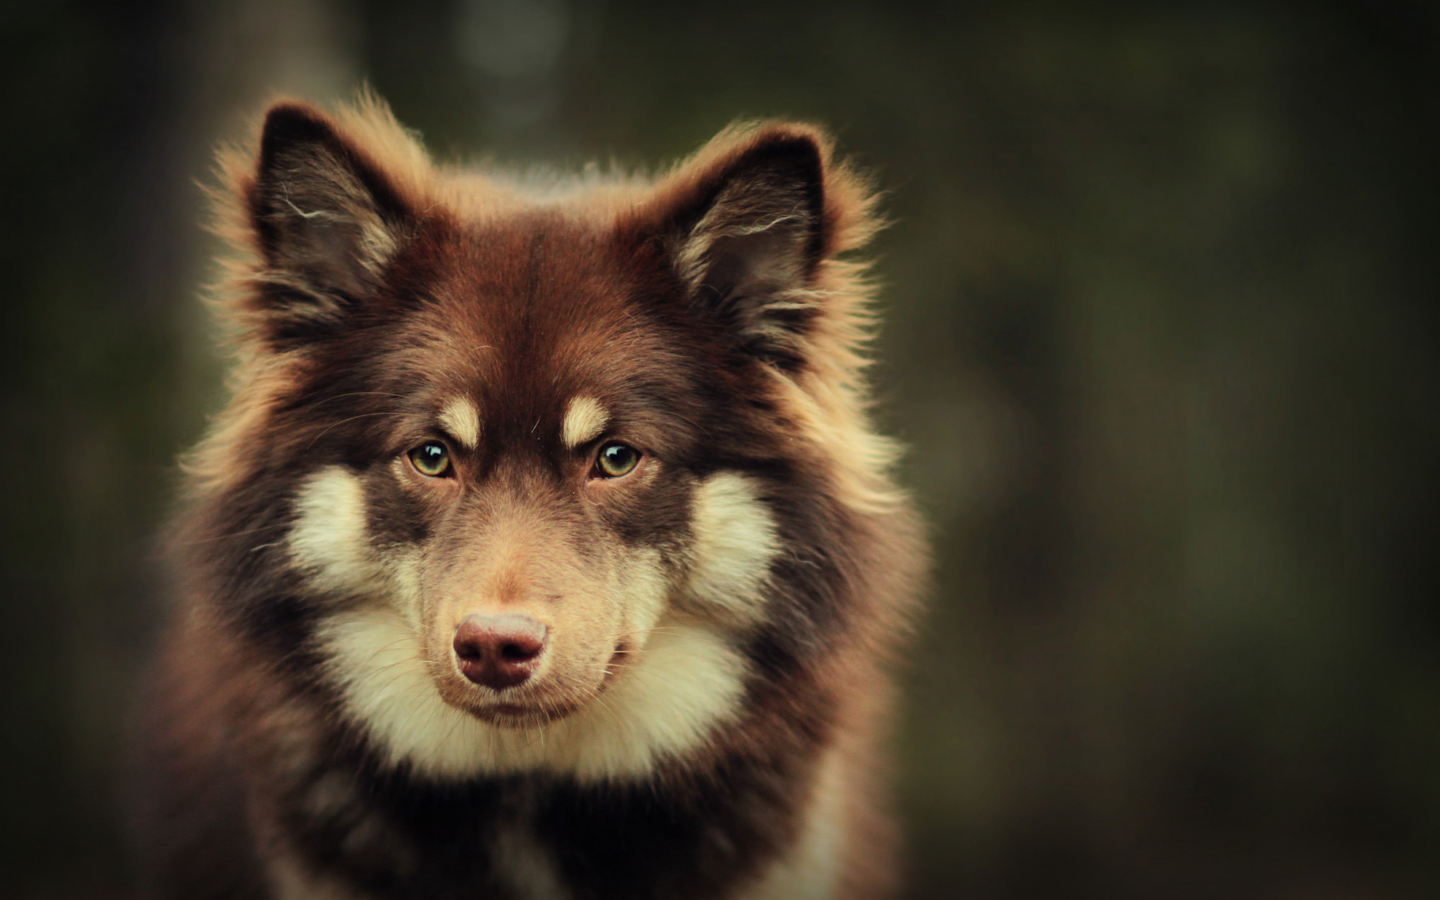 Dog With Smart Eyes wallpaper 1440x900